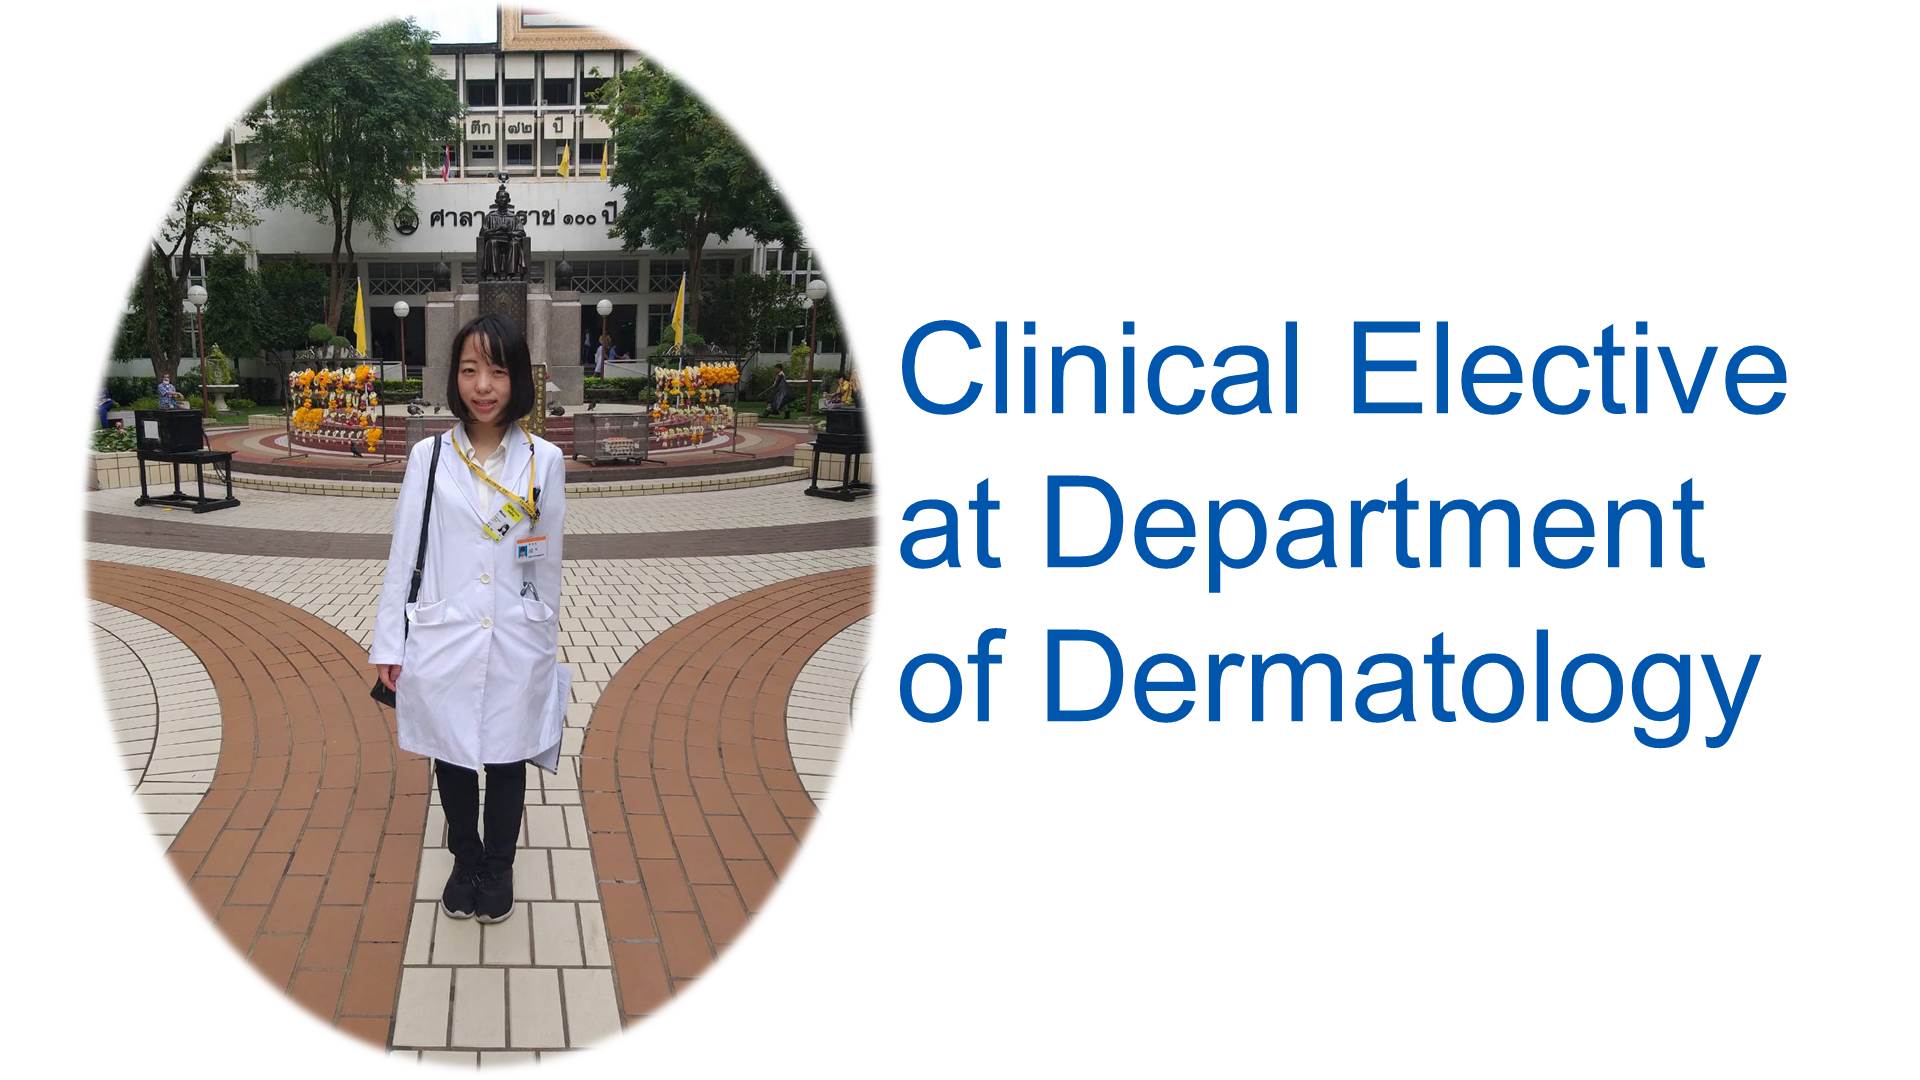 Elective Study at Department of Dermatology